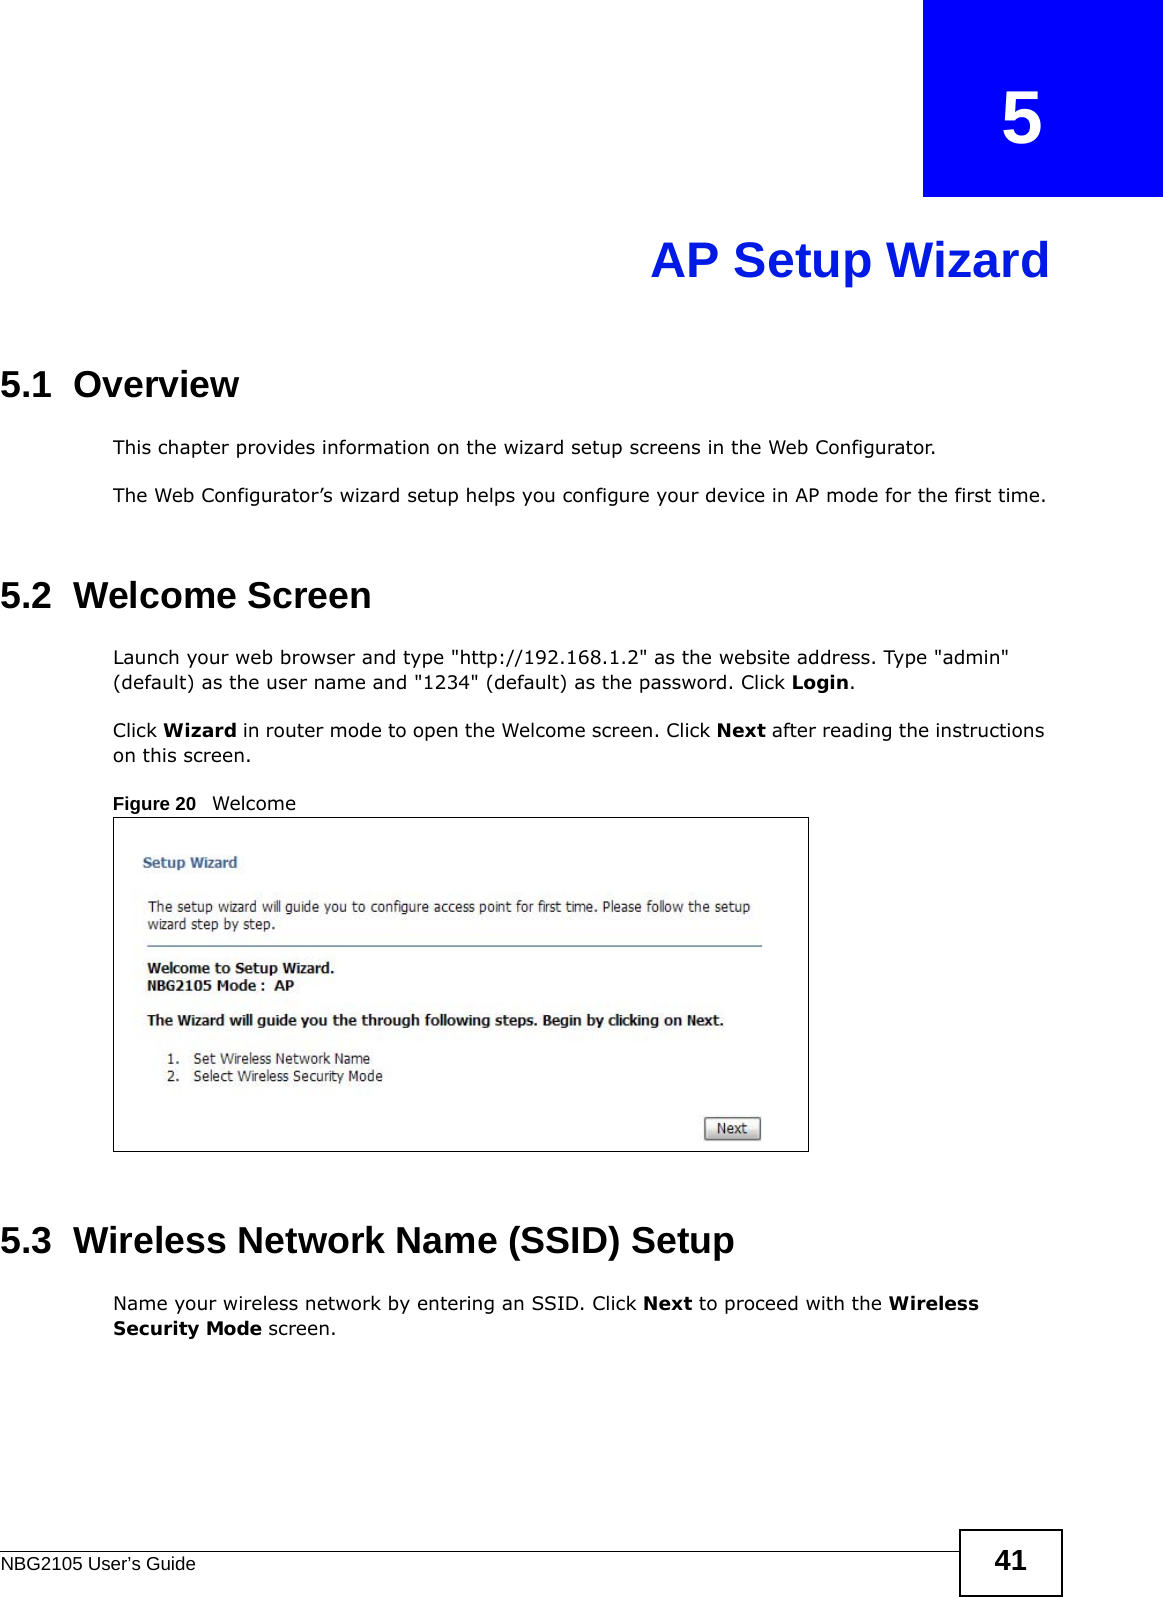 NBG2105 User’s Guide 41CHAPTER   5AP Setup Wizard5.1  OverviewThis chapter provides information on the wizard setup screens in the Web Configurator.The Web Configurator’s wizard setup helps you configure your device in AP mode for the first time.5.2  Welcome ScreenLaunch your web browser and type &quot;http://192.168.1.2&quot; as the website address. Type &quot;admin&quot; (default) as the user name and &quot;1234&quot; (default) as the password. Click Login.Click Wizard in router mode to open the Welcome screen. Click Next after reading the instructions on this screen.Figure 20   Welcome 5.3  Wireless Network Name (SSID) SetupName your wireless network by entering an SSID. Click Next to proceed with the Wireless Security Mode screen.